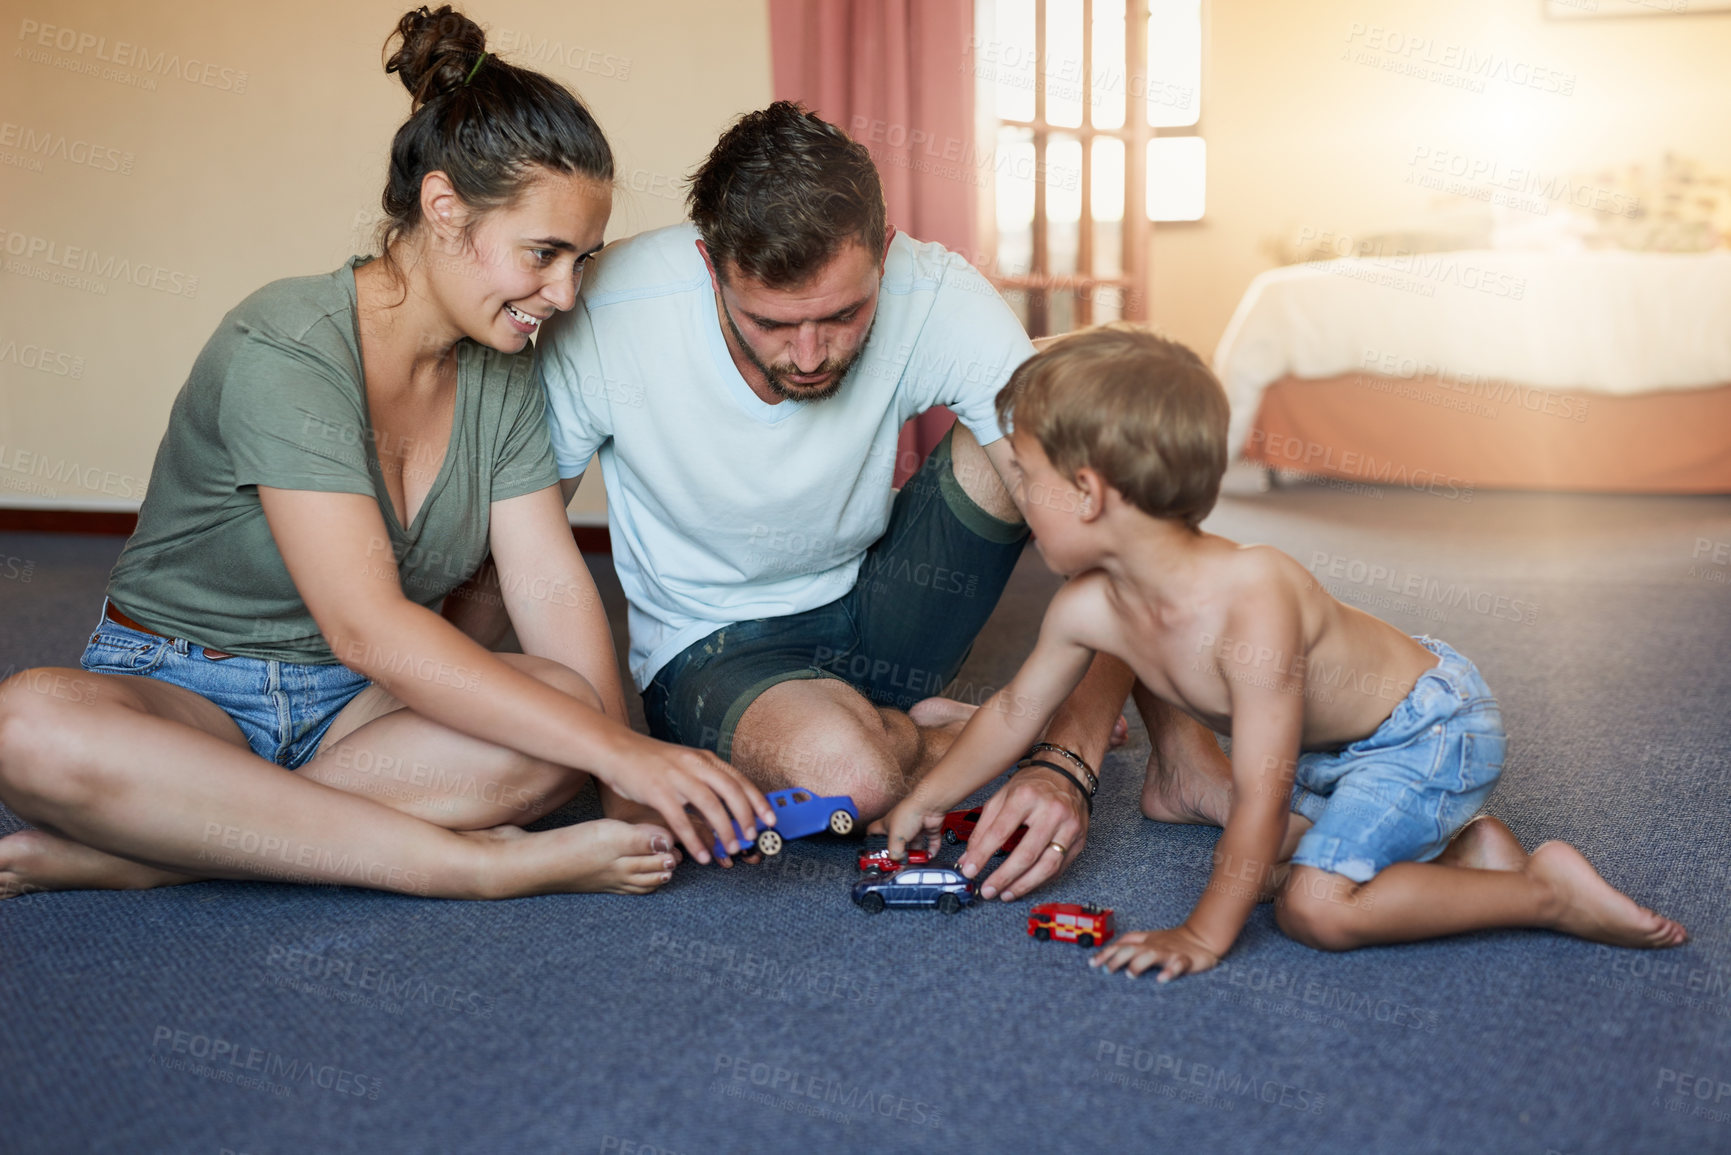 Buy stock photo Shot of a little boy and his father playing with toy cars at home